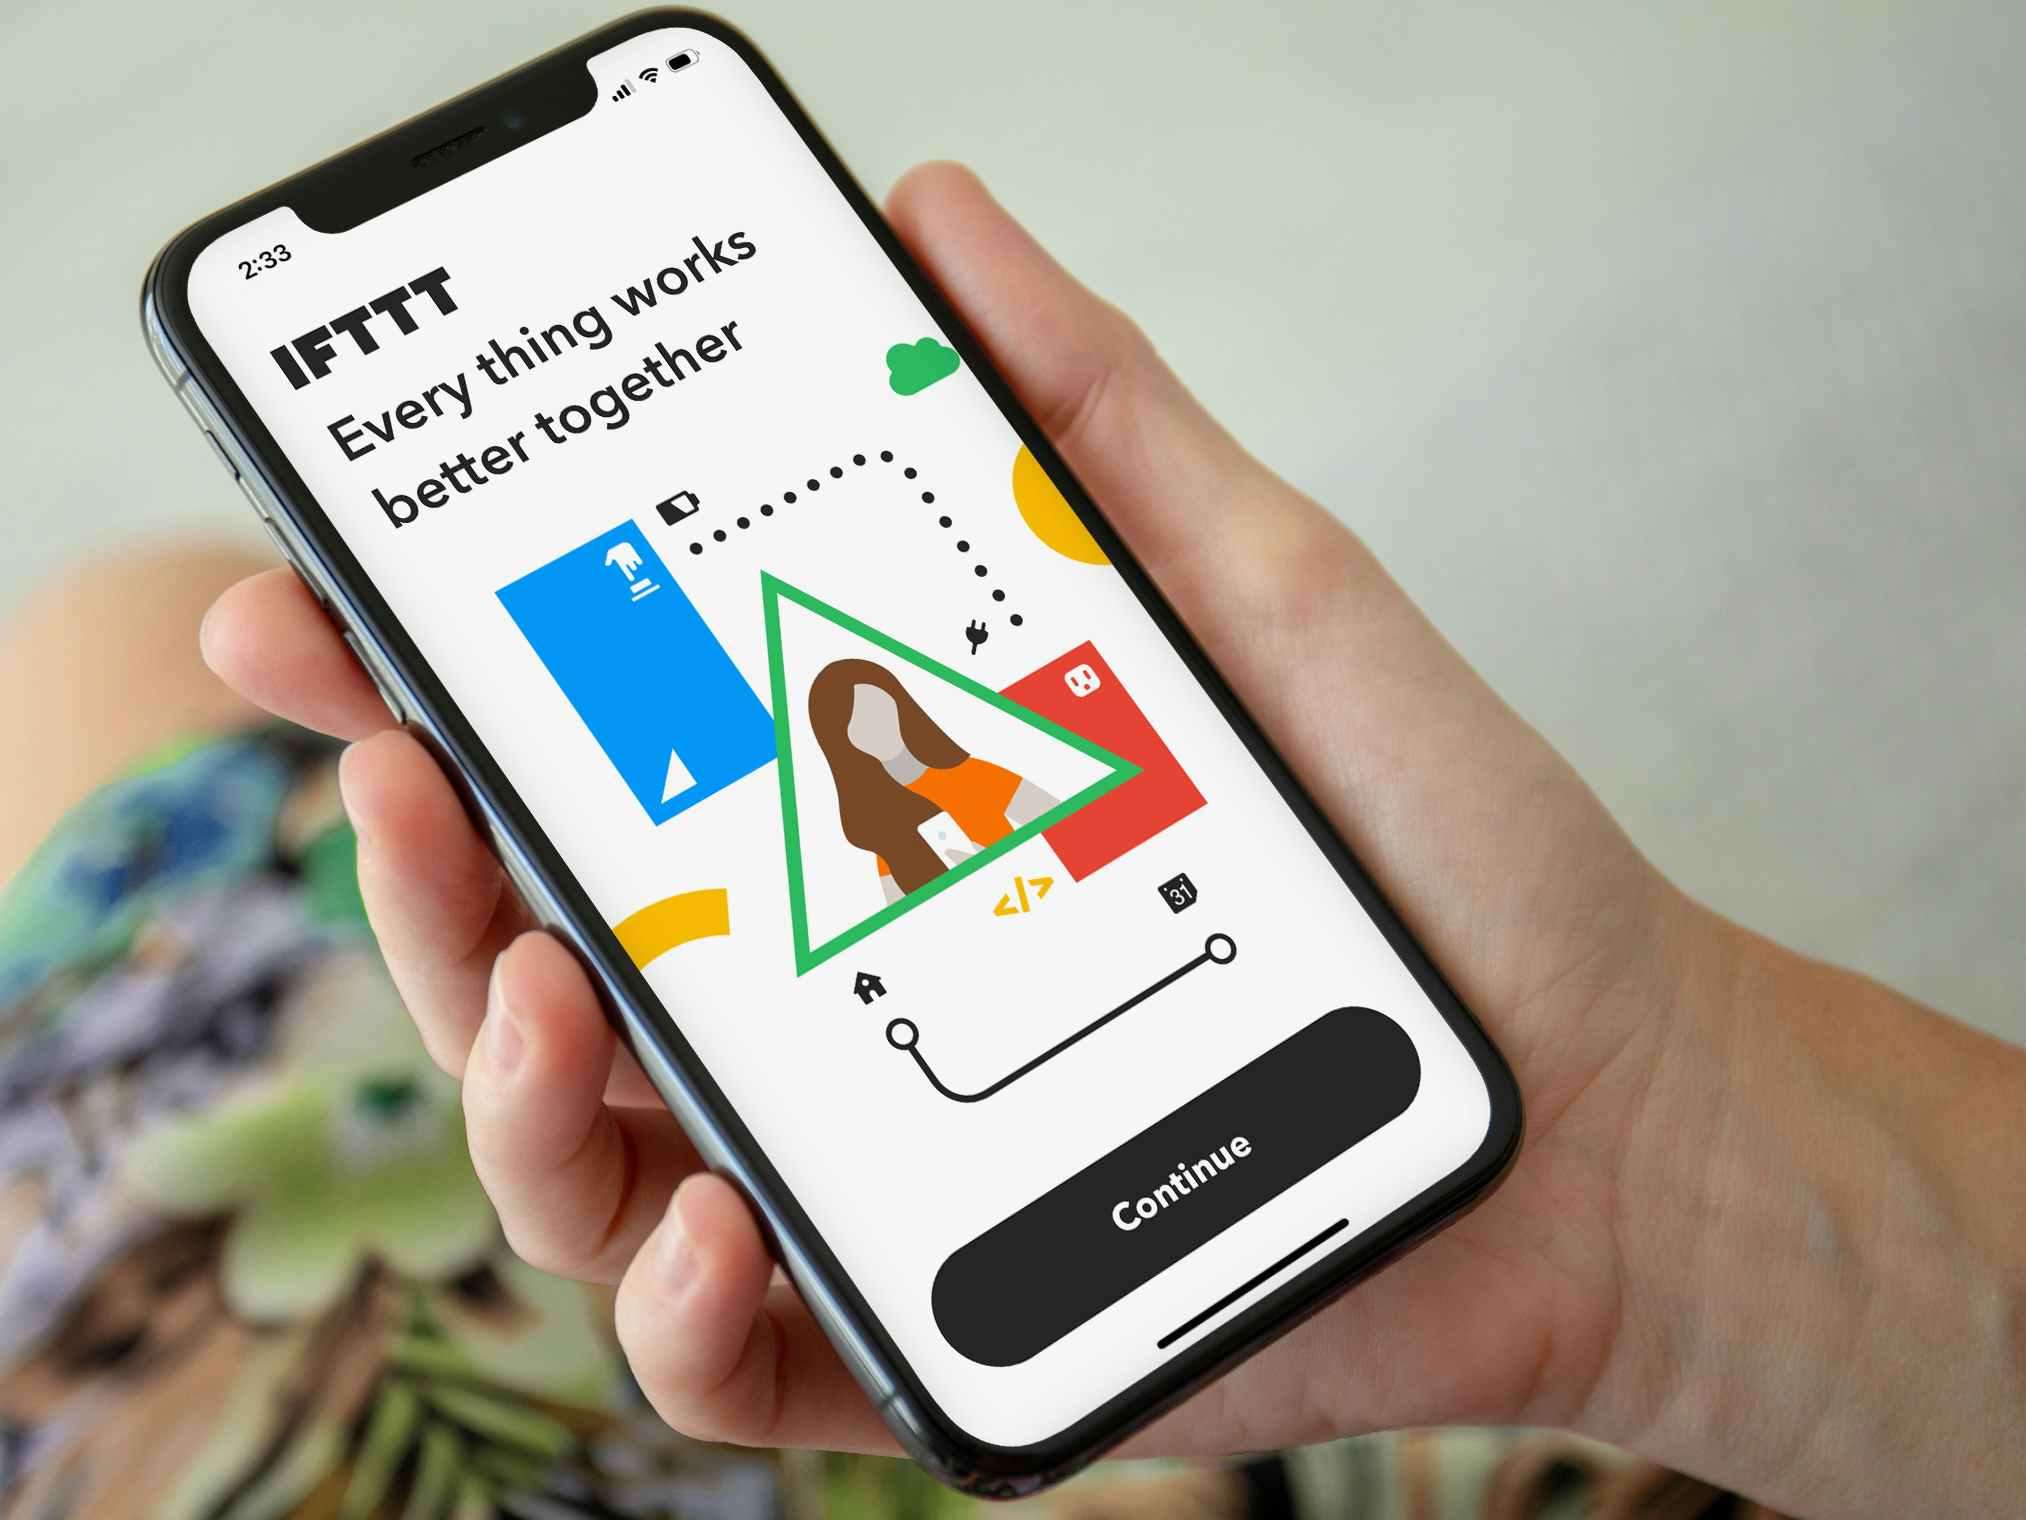 Someone looking at the IFTTT app on their phone